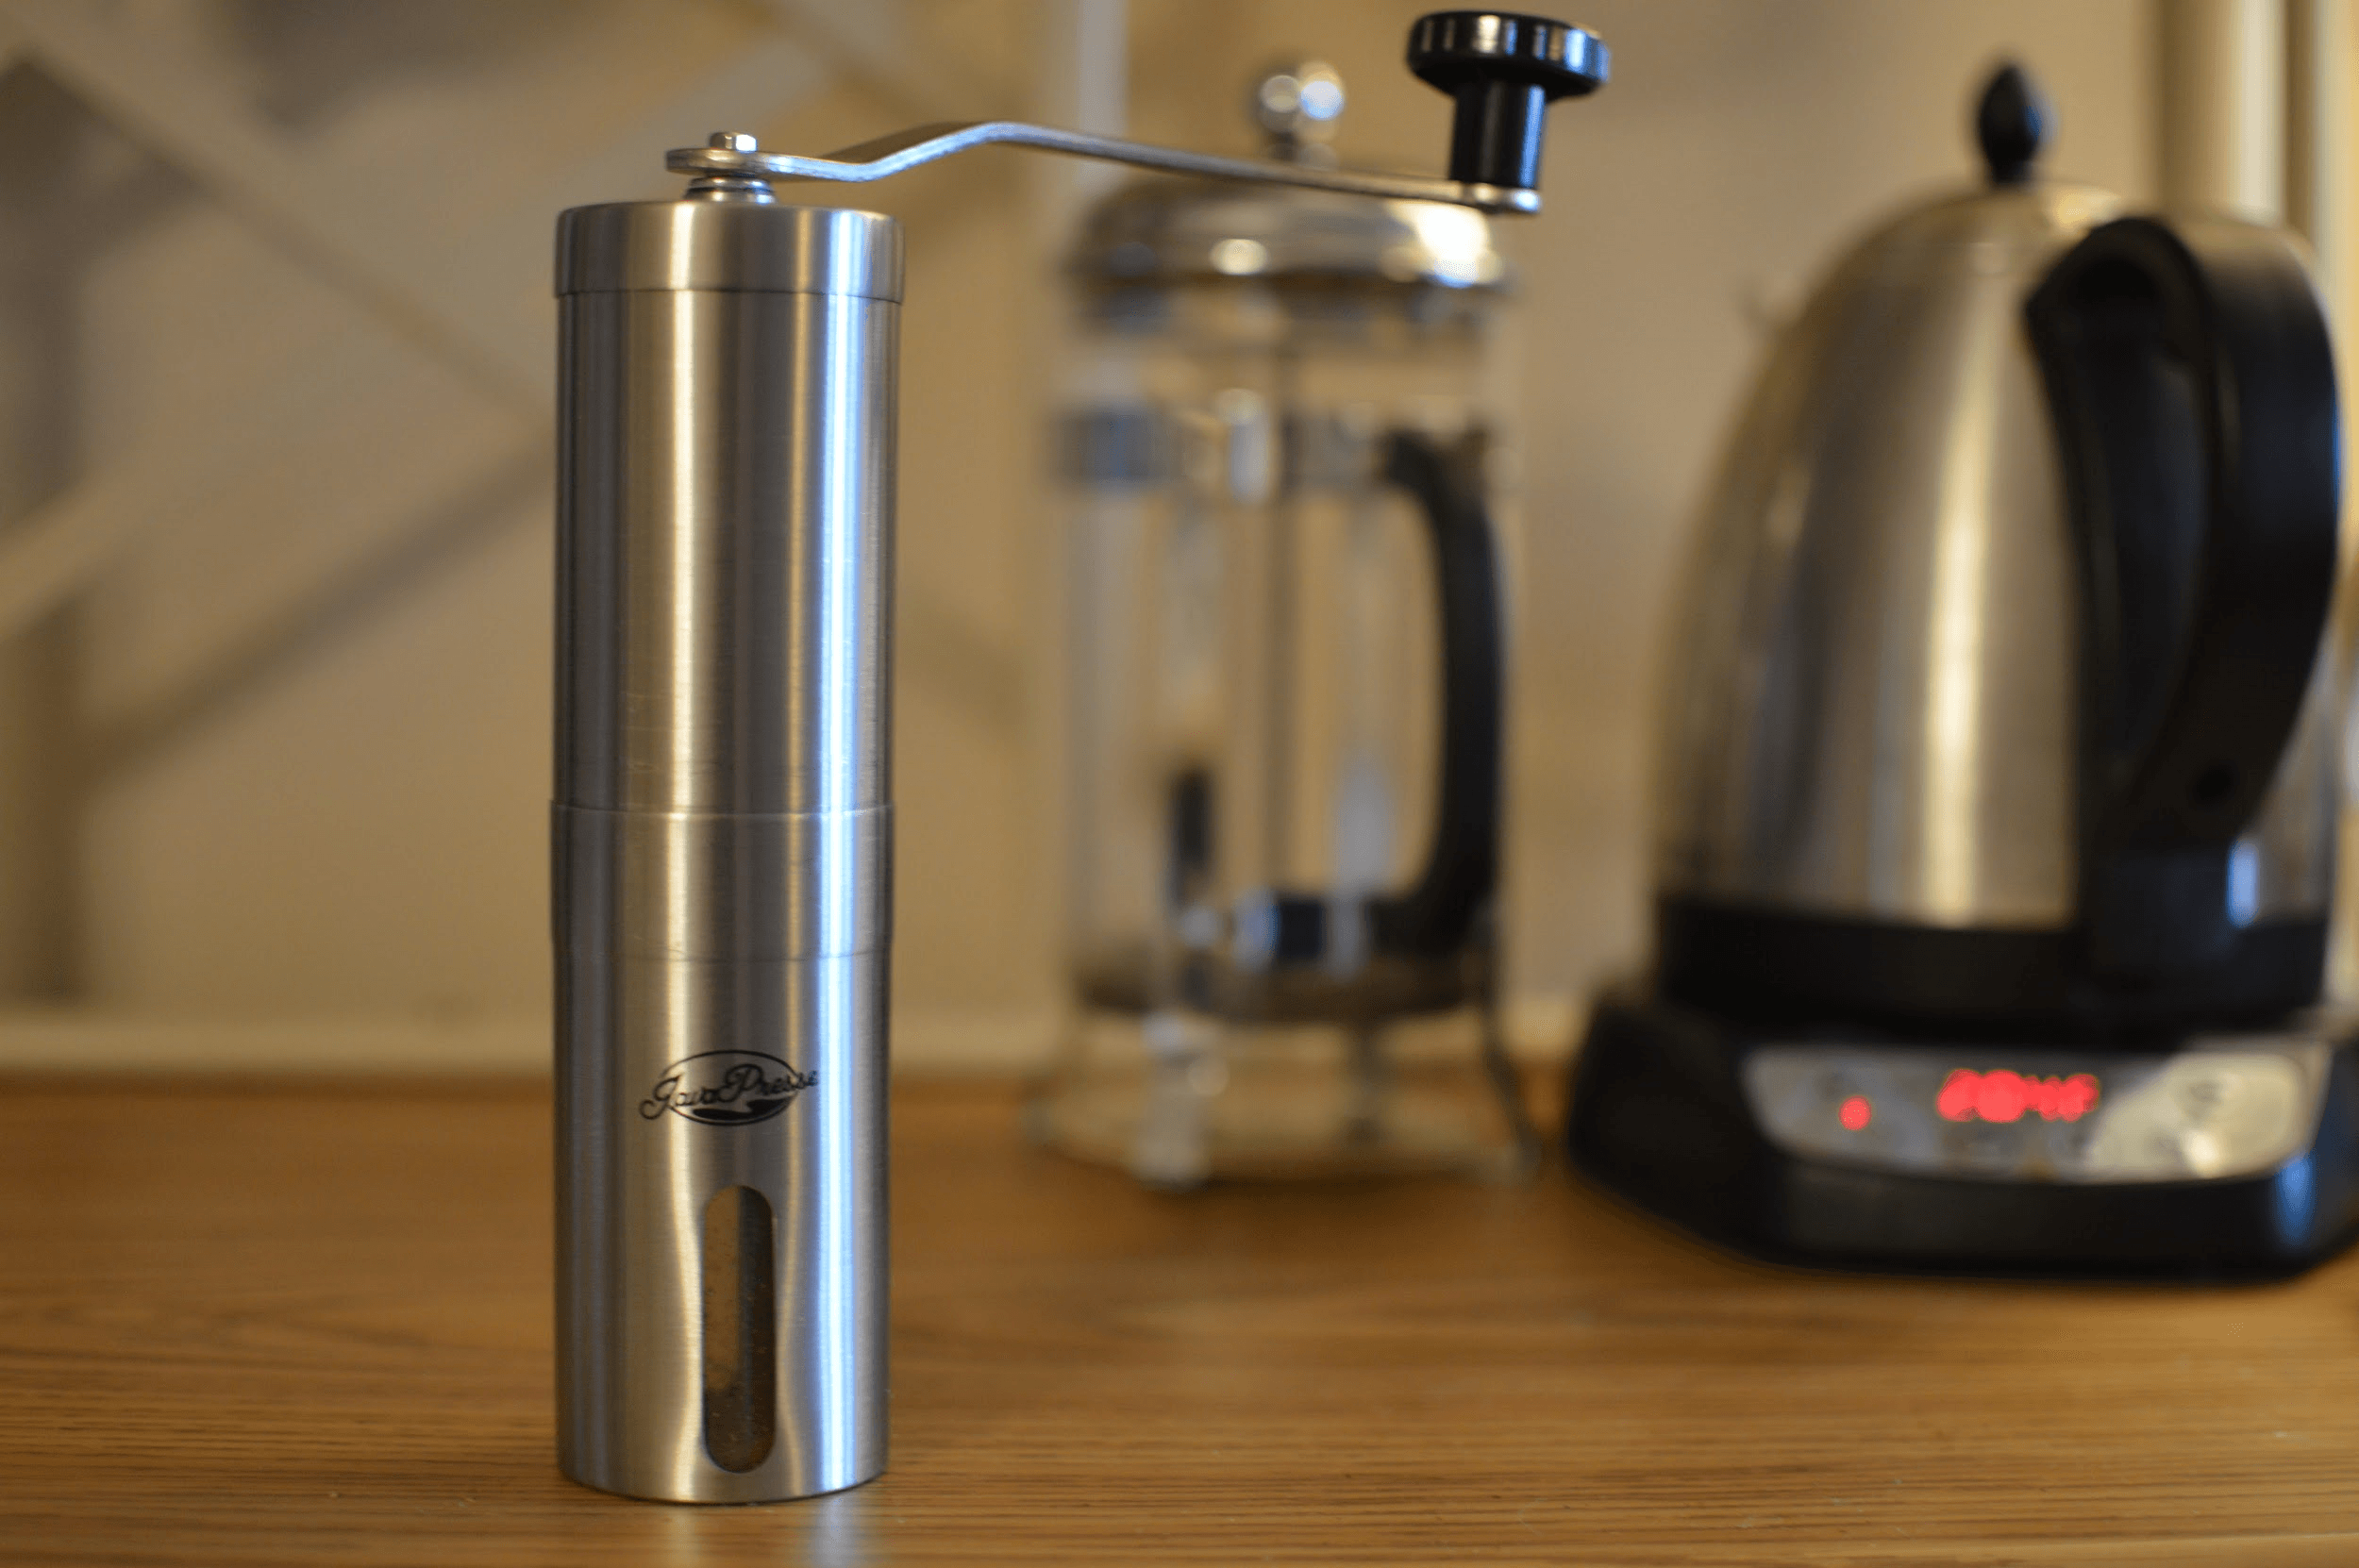 Coffee Accessories That You Need - JavaPresse Coffee Company